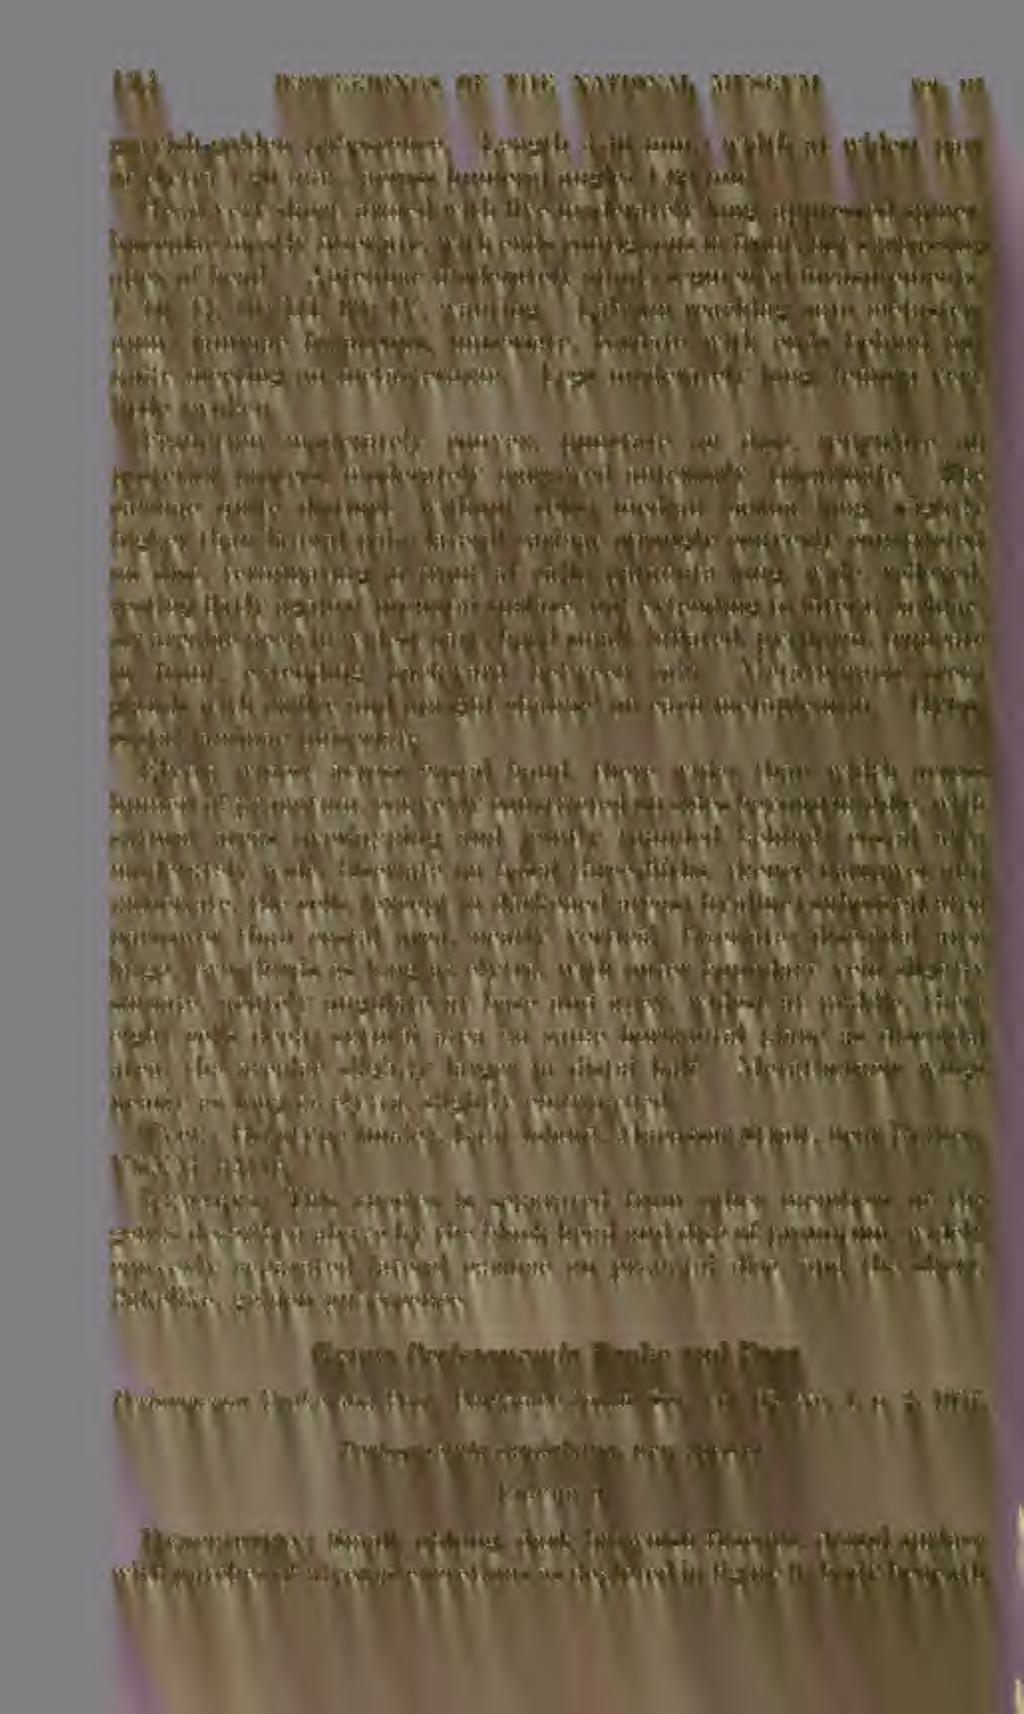 134 PROCEEDINGS OF THE NATIONAL MUSEUM vol. lis grayish-golden pubescence. Length 3.40 mm.; width at widest part of elytra 1.20 mm., across humeral angles 1.00 mm.